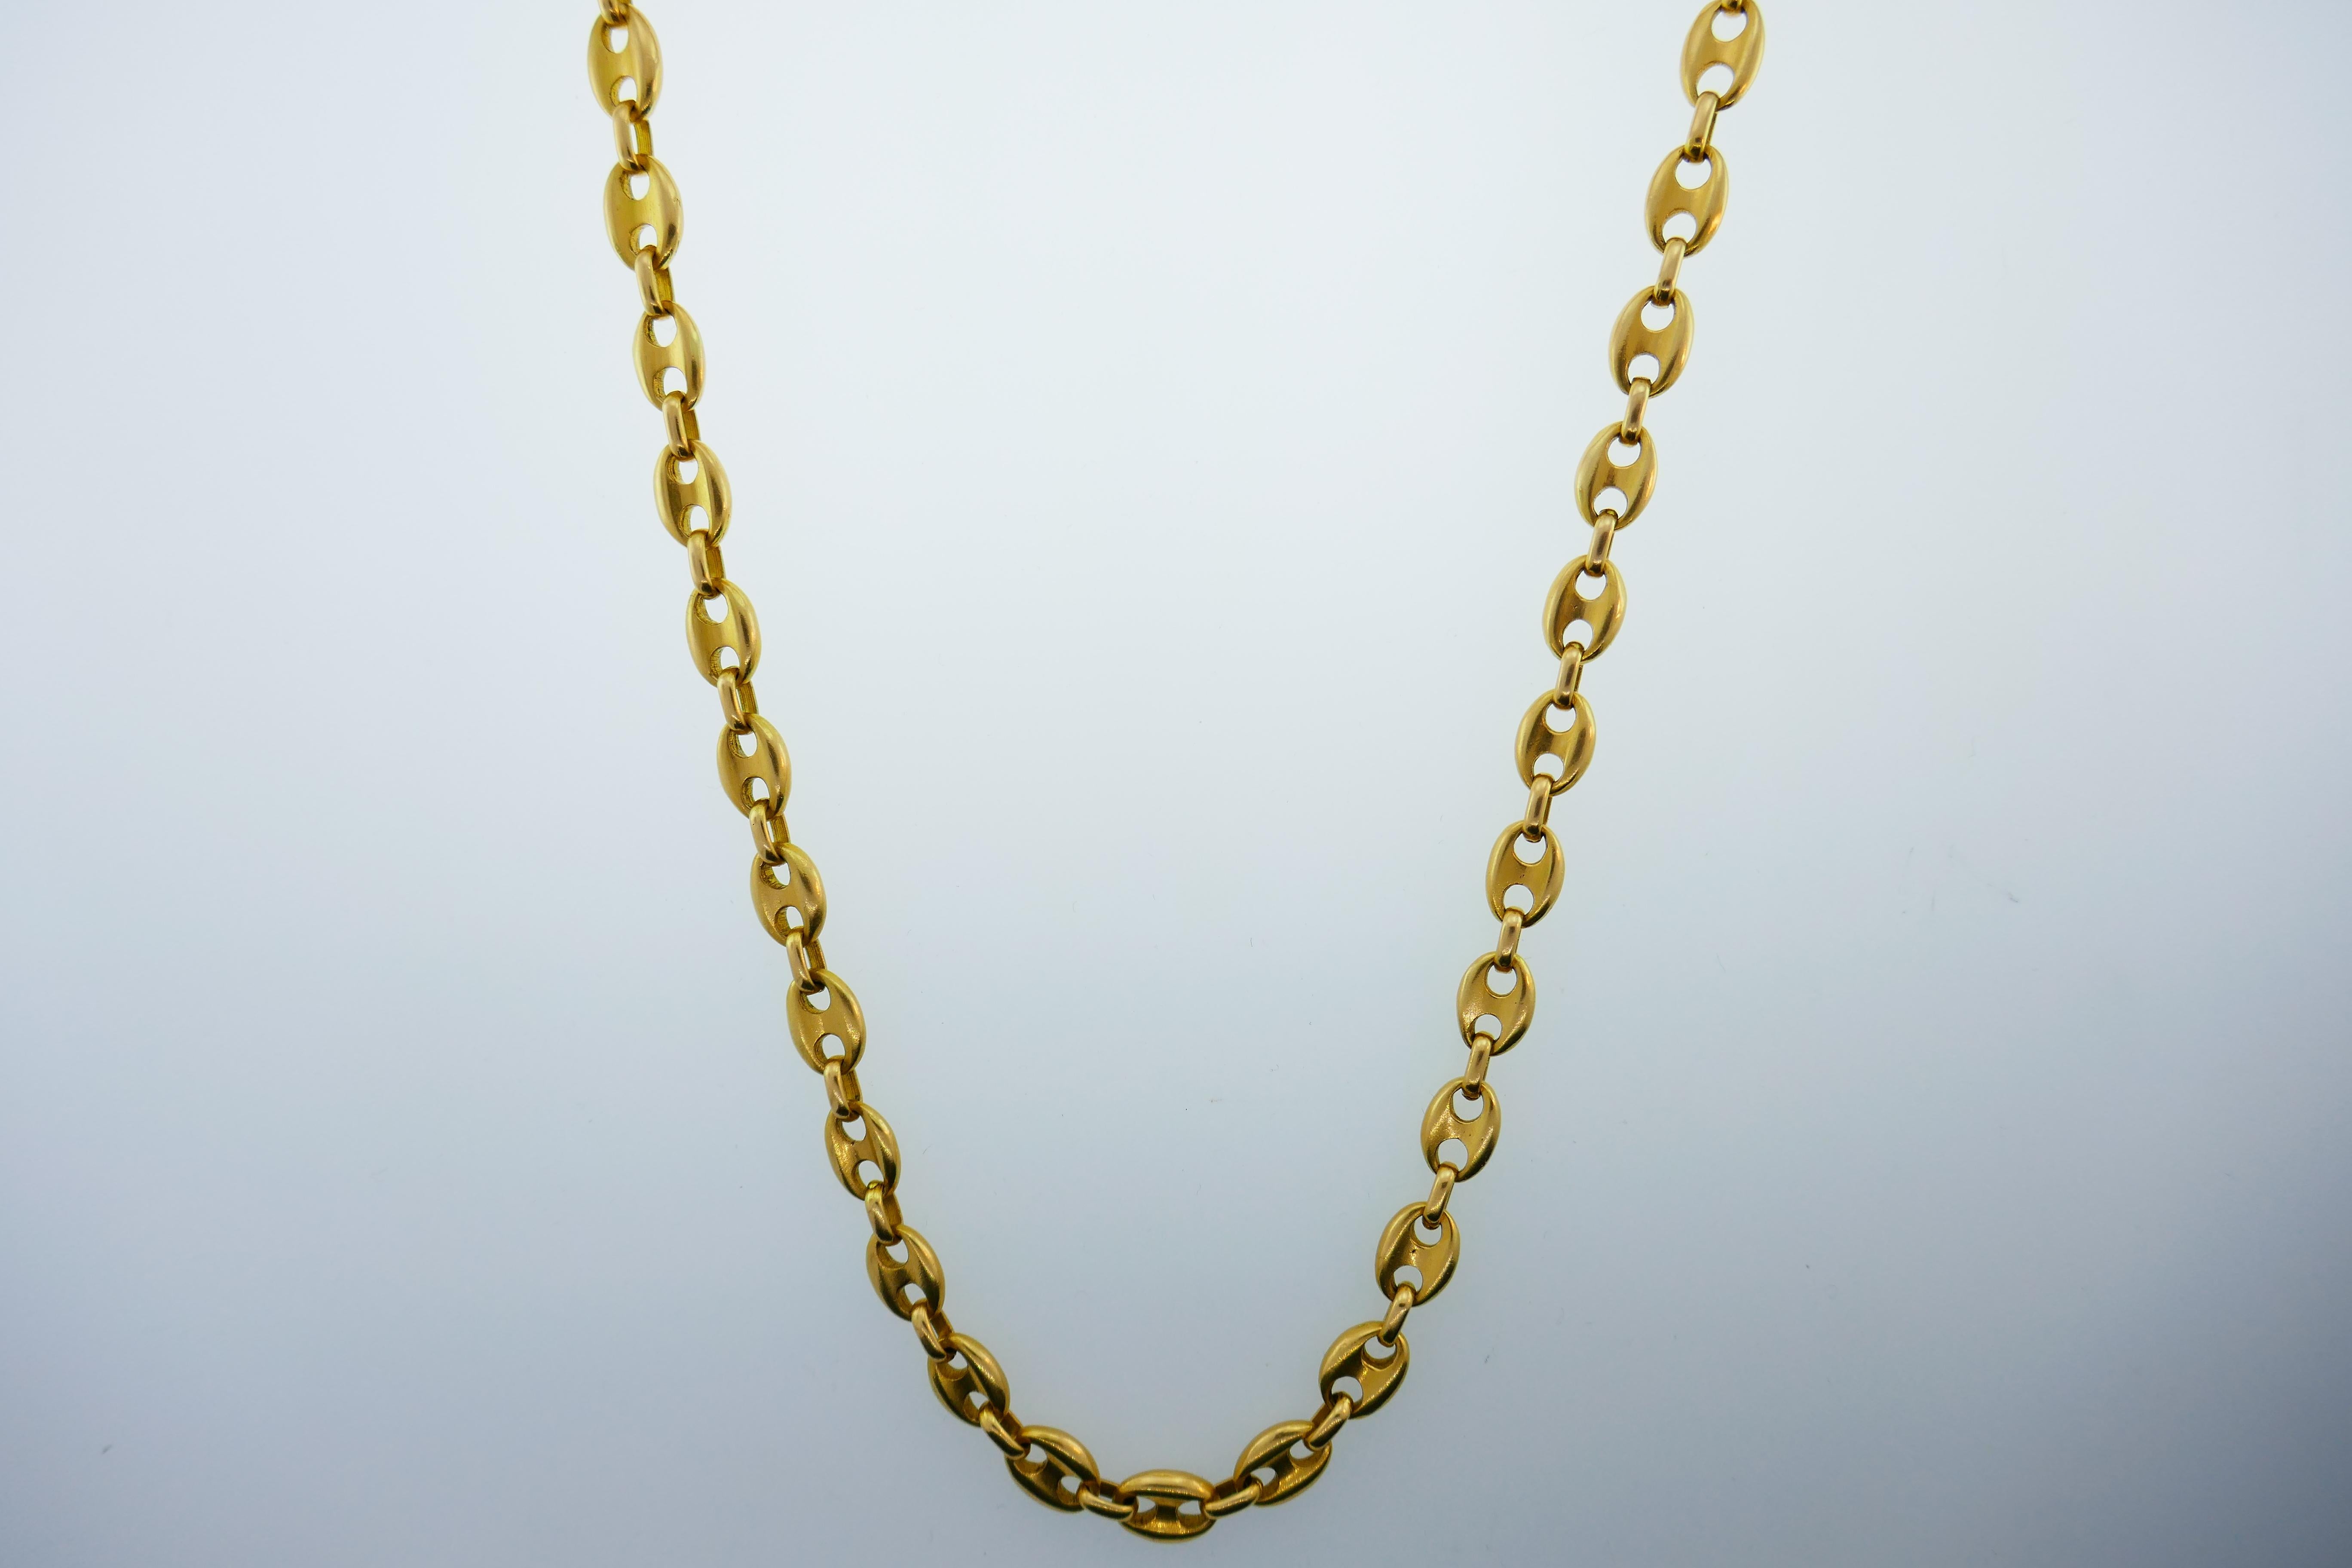 Here is your chance to purchase a beautiful and highly collectible European made chain necklace.  Truly a great piece at a great price! 

Weight: 111.7 grams

Dimensions:  30.5